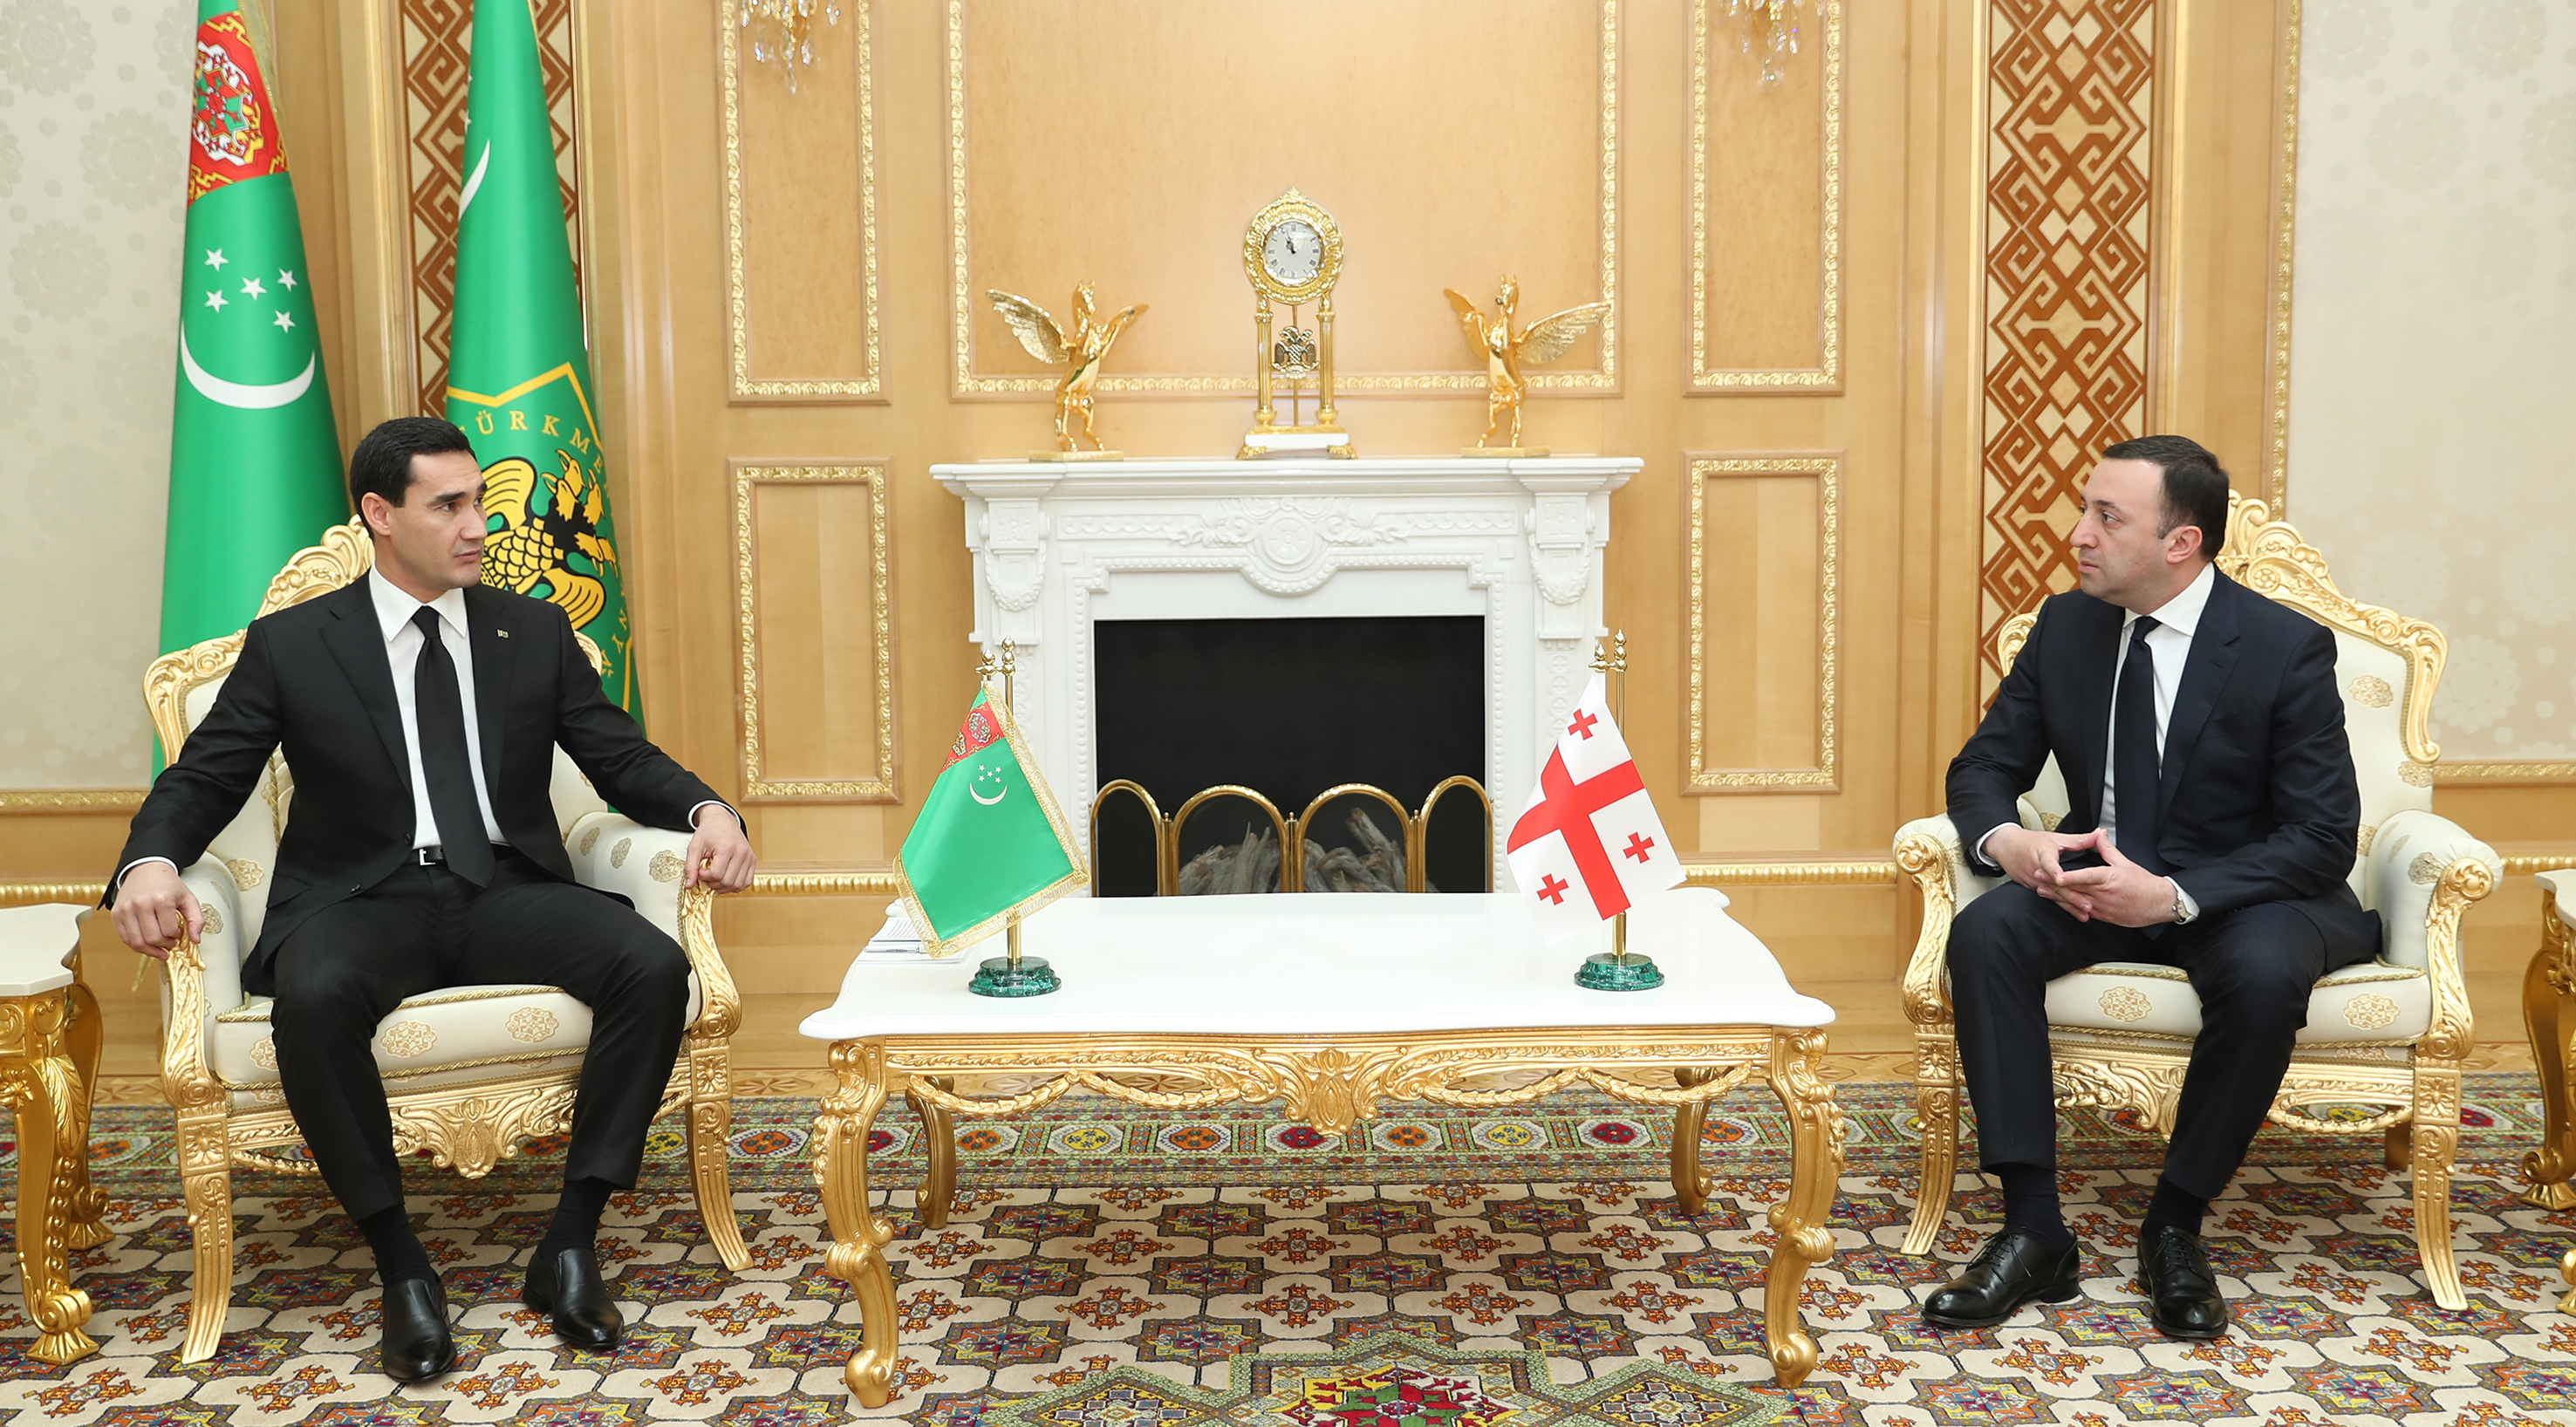 The President of Turkmenistan received the Prime Minister of Georgia